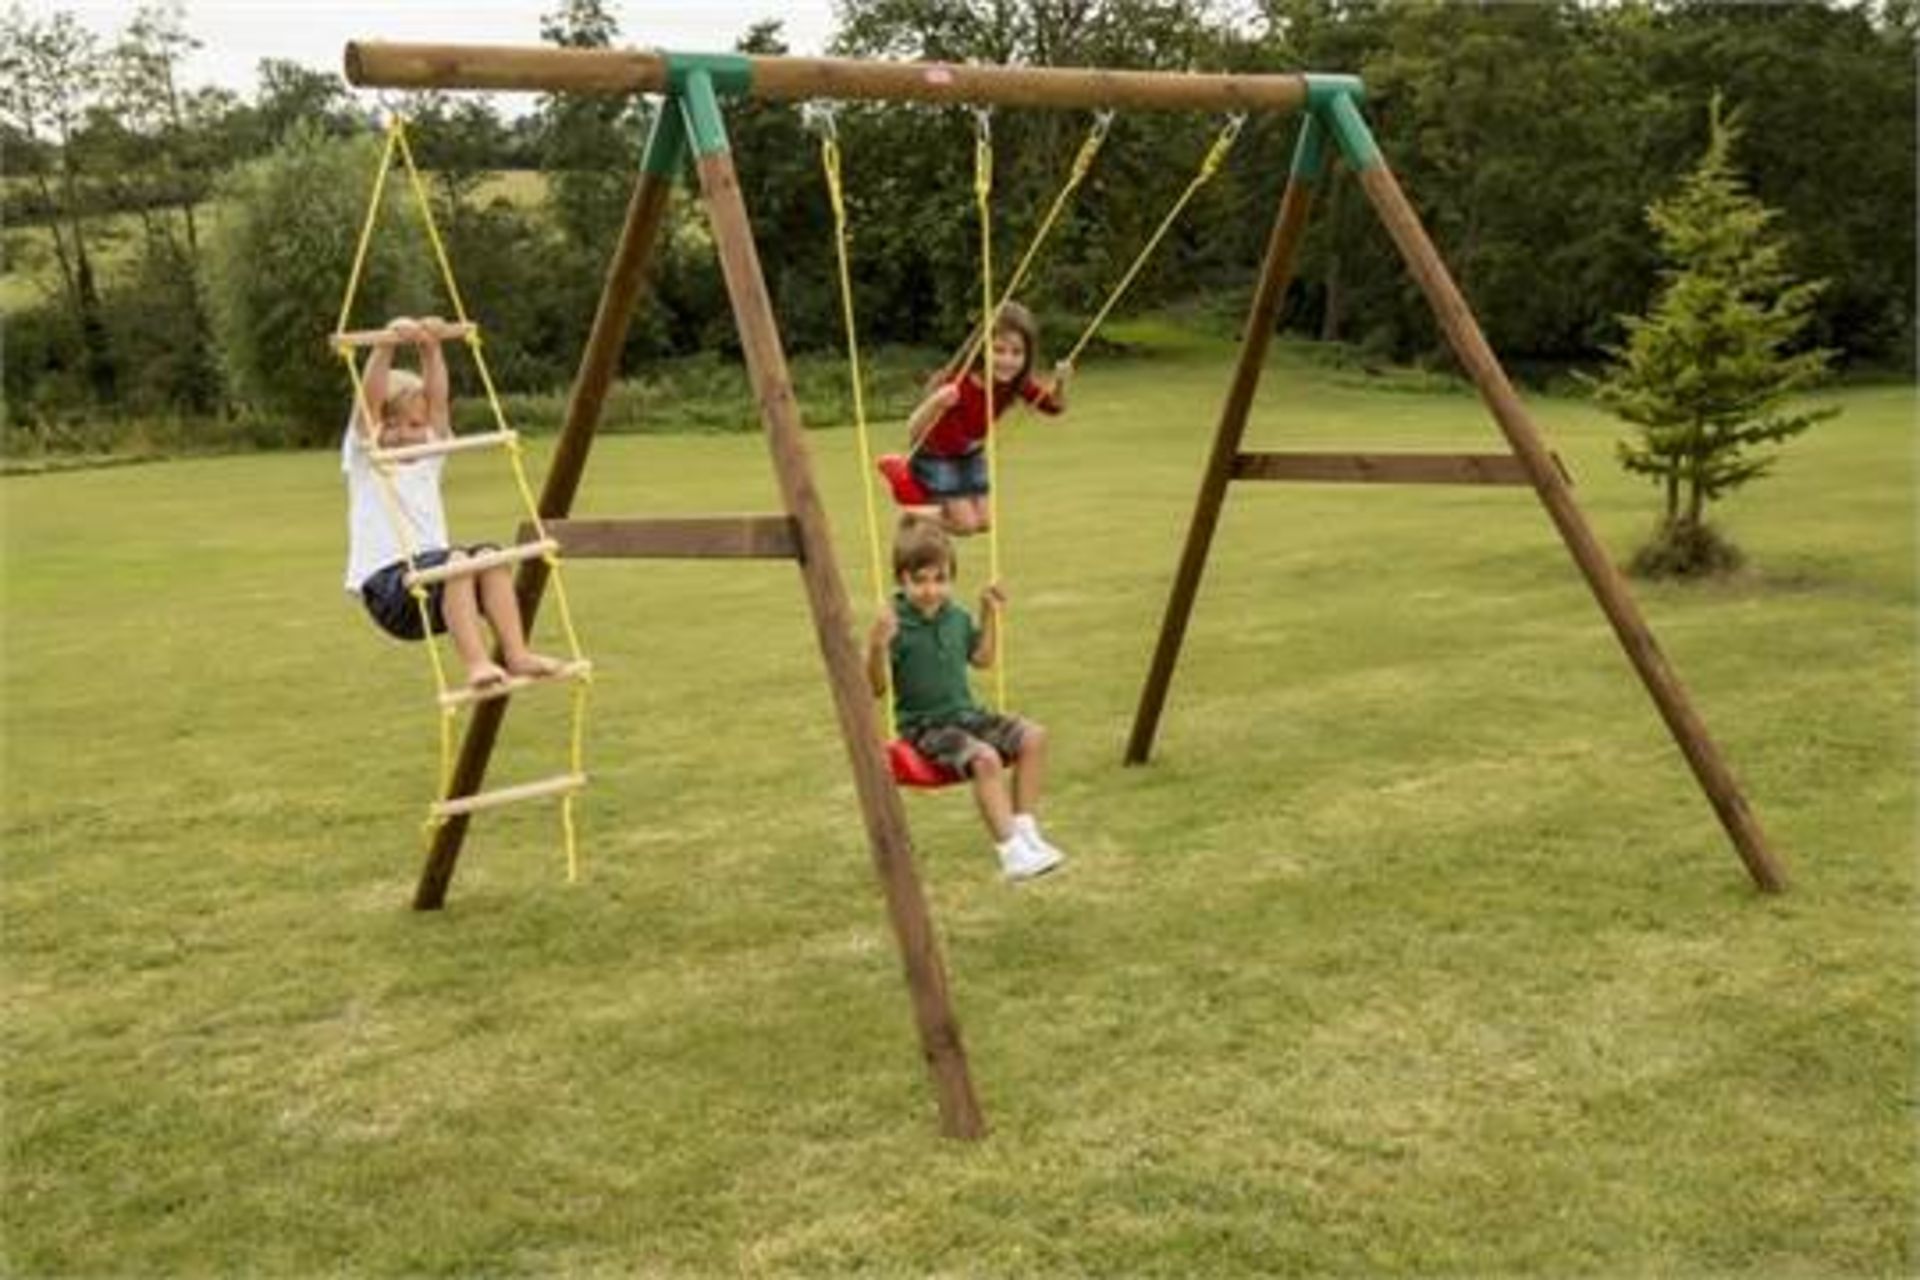 New Little Tikes Riga Swing with Ladder. RRP £349. This wooden play system will provide hours of